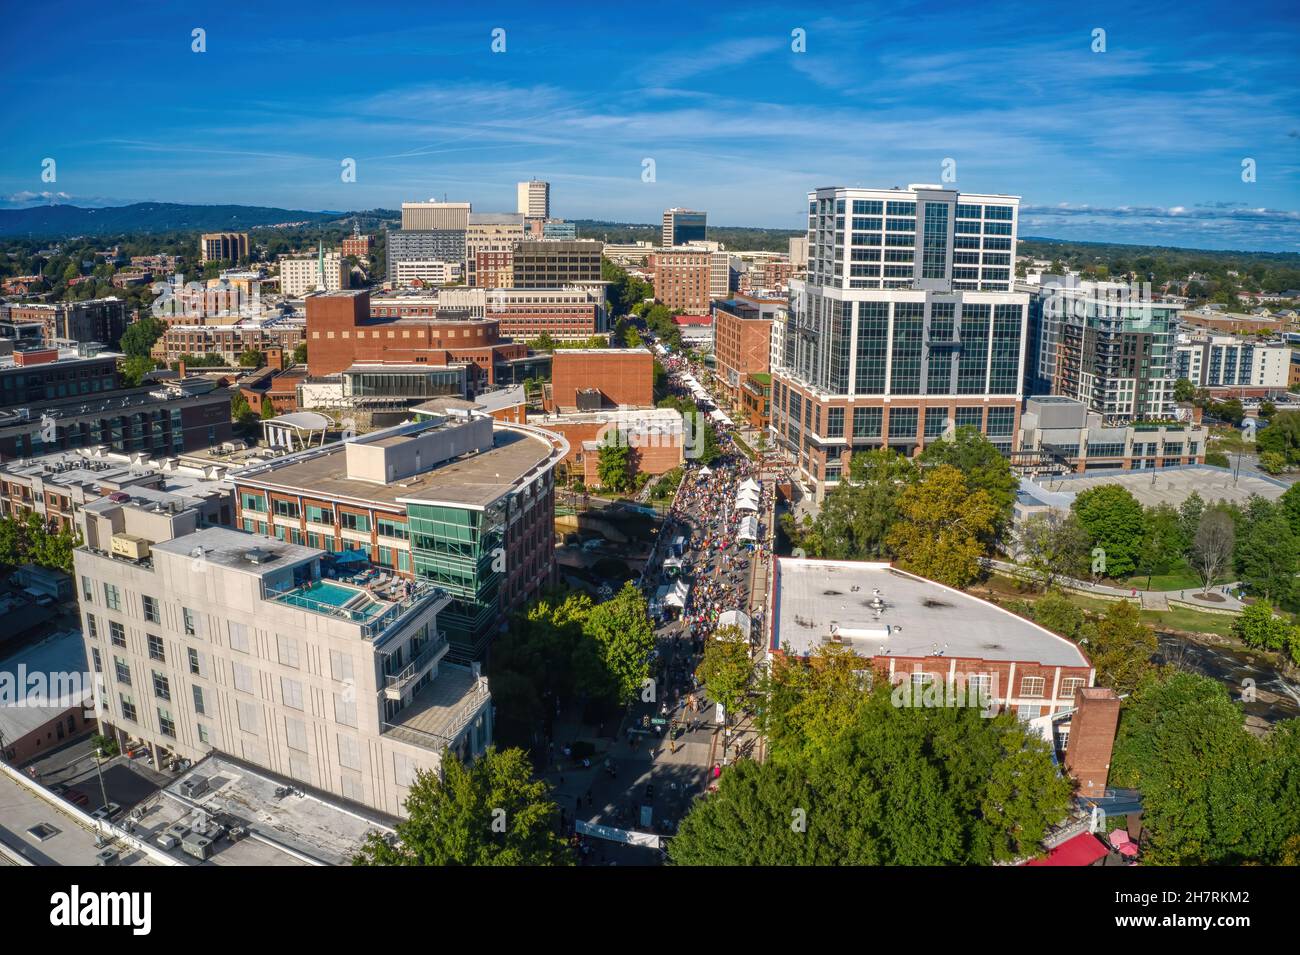 Beautiful aerial view of Greenville under a blue sky in South Carolina Stock Photo